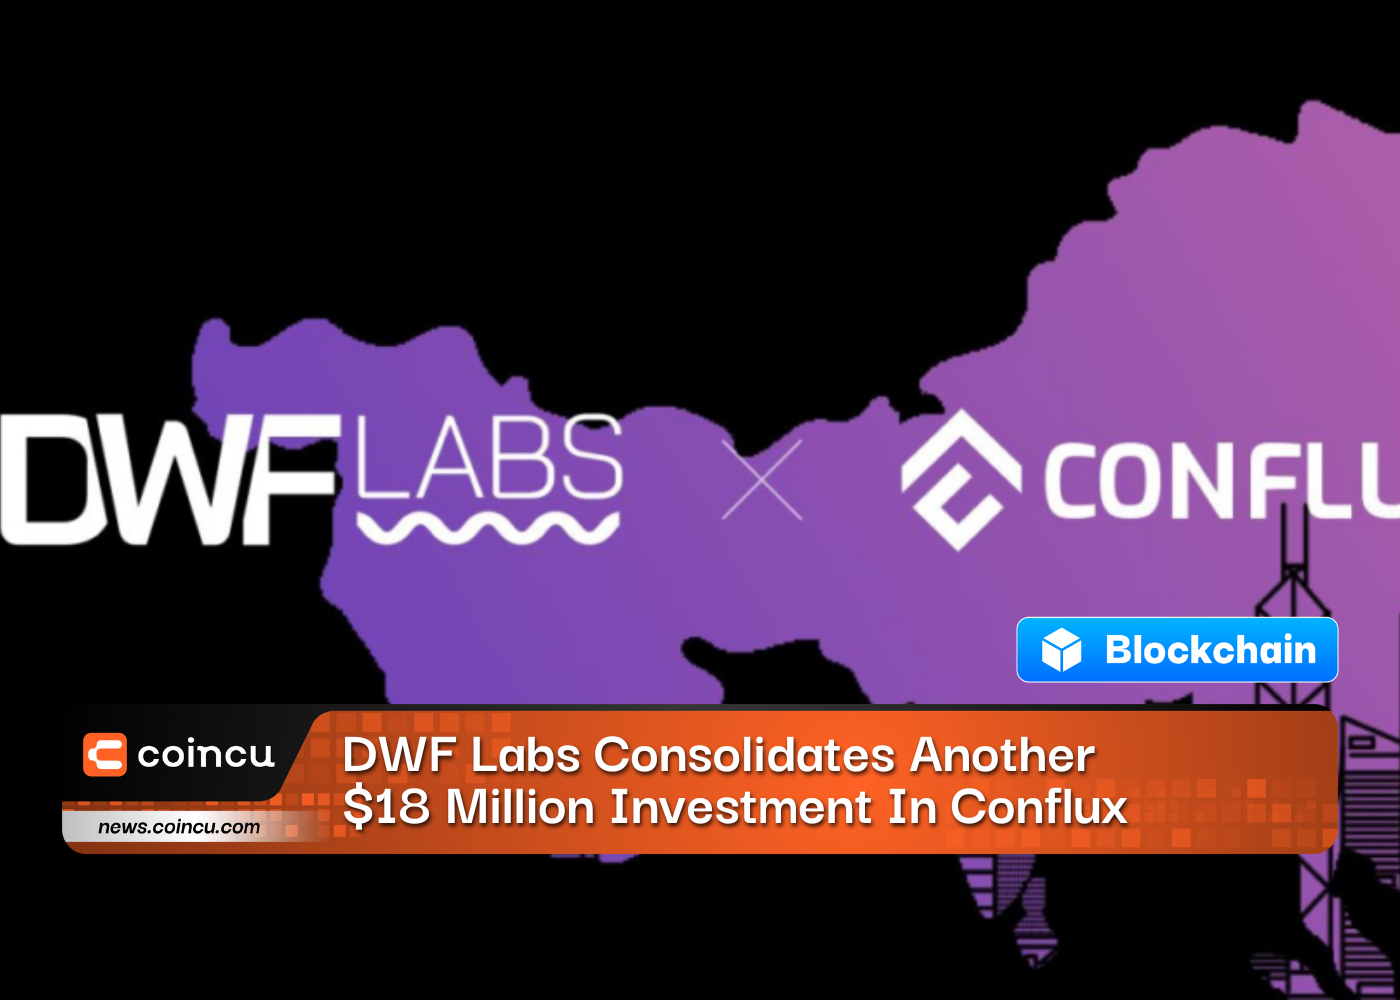 DWF Labs Consolidates Another $18 Million Investment In Conflux